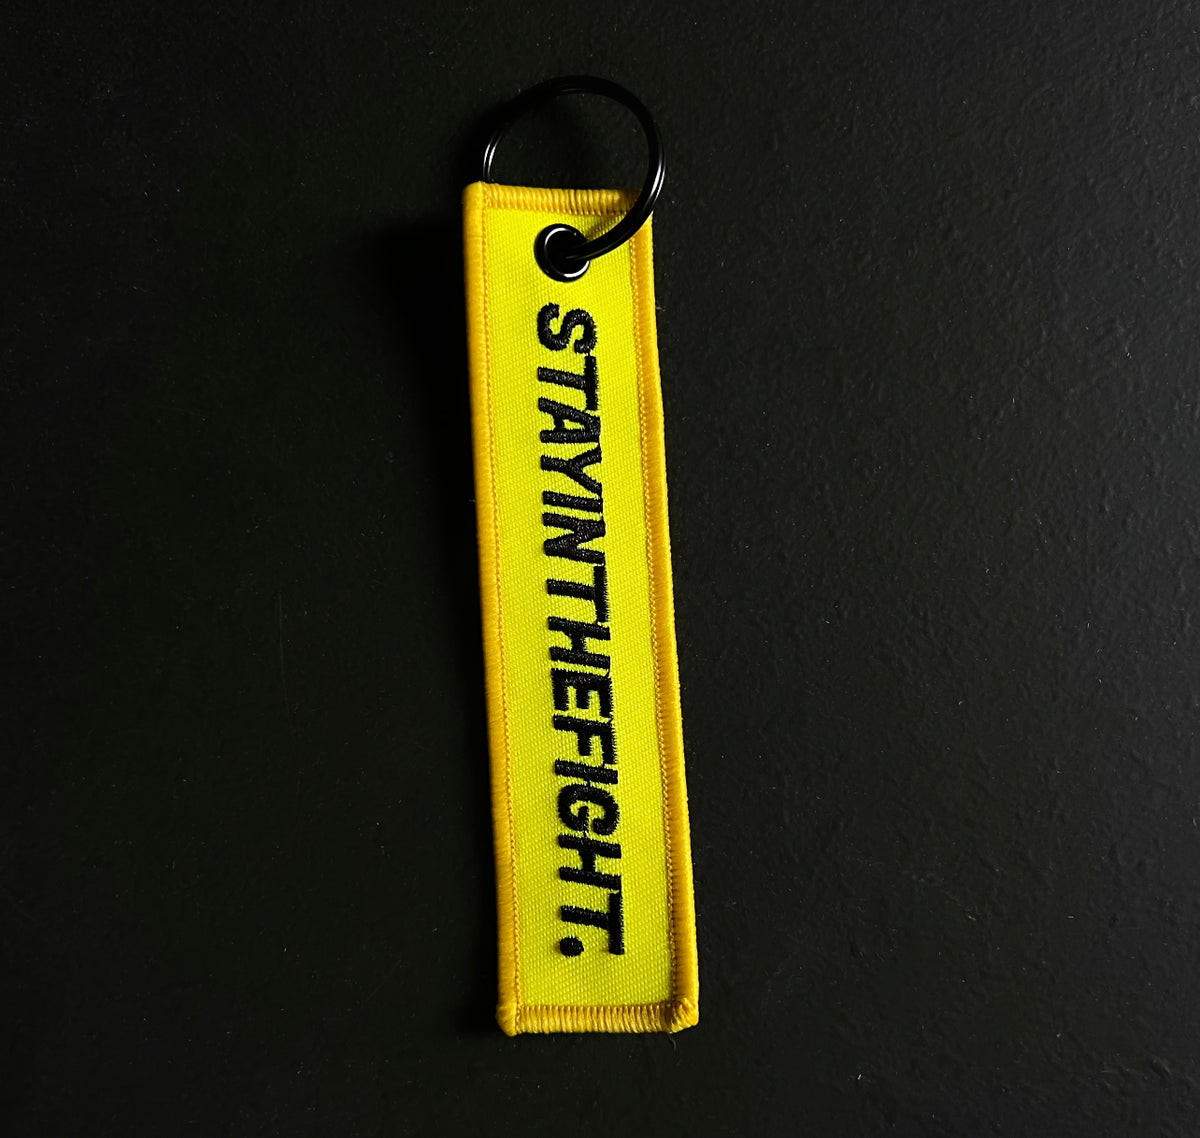 RPG &quot;STAYINTHEFIGHT.&quot; KEY CHAIN